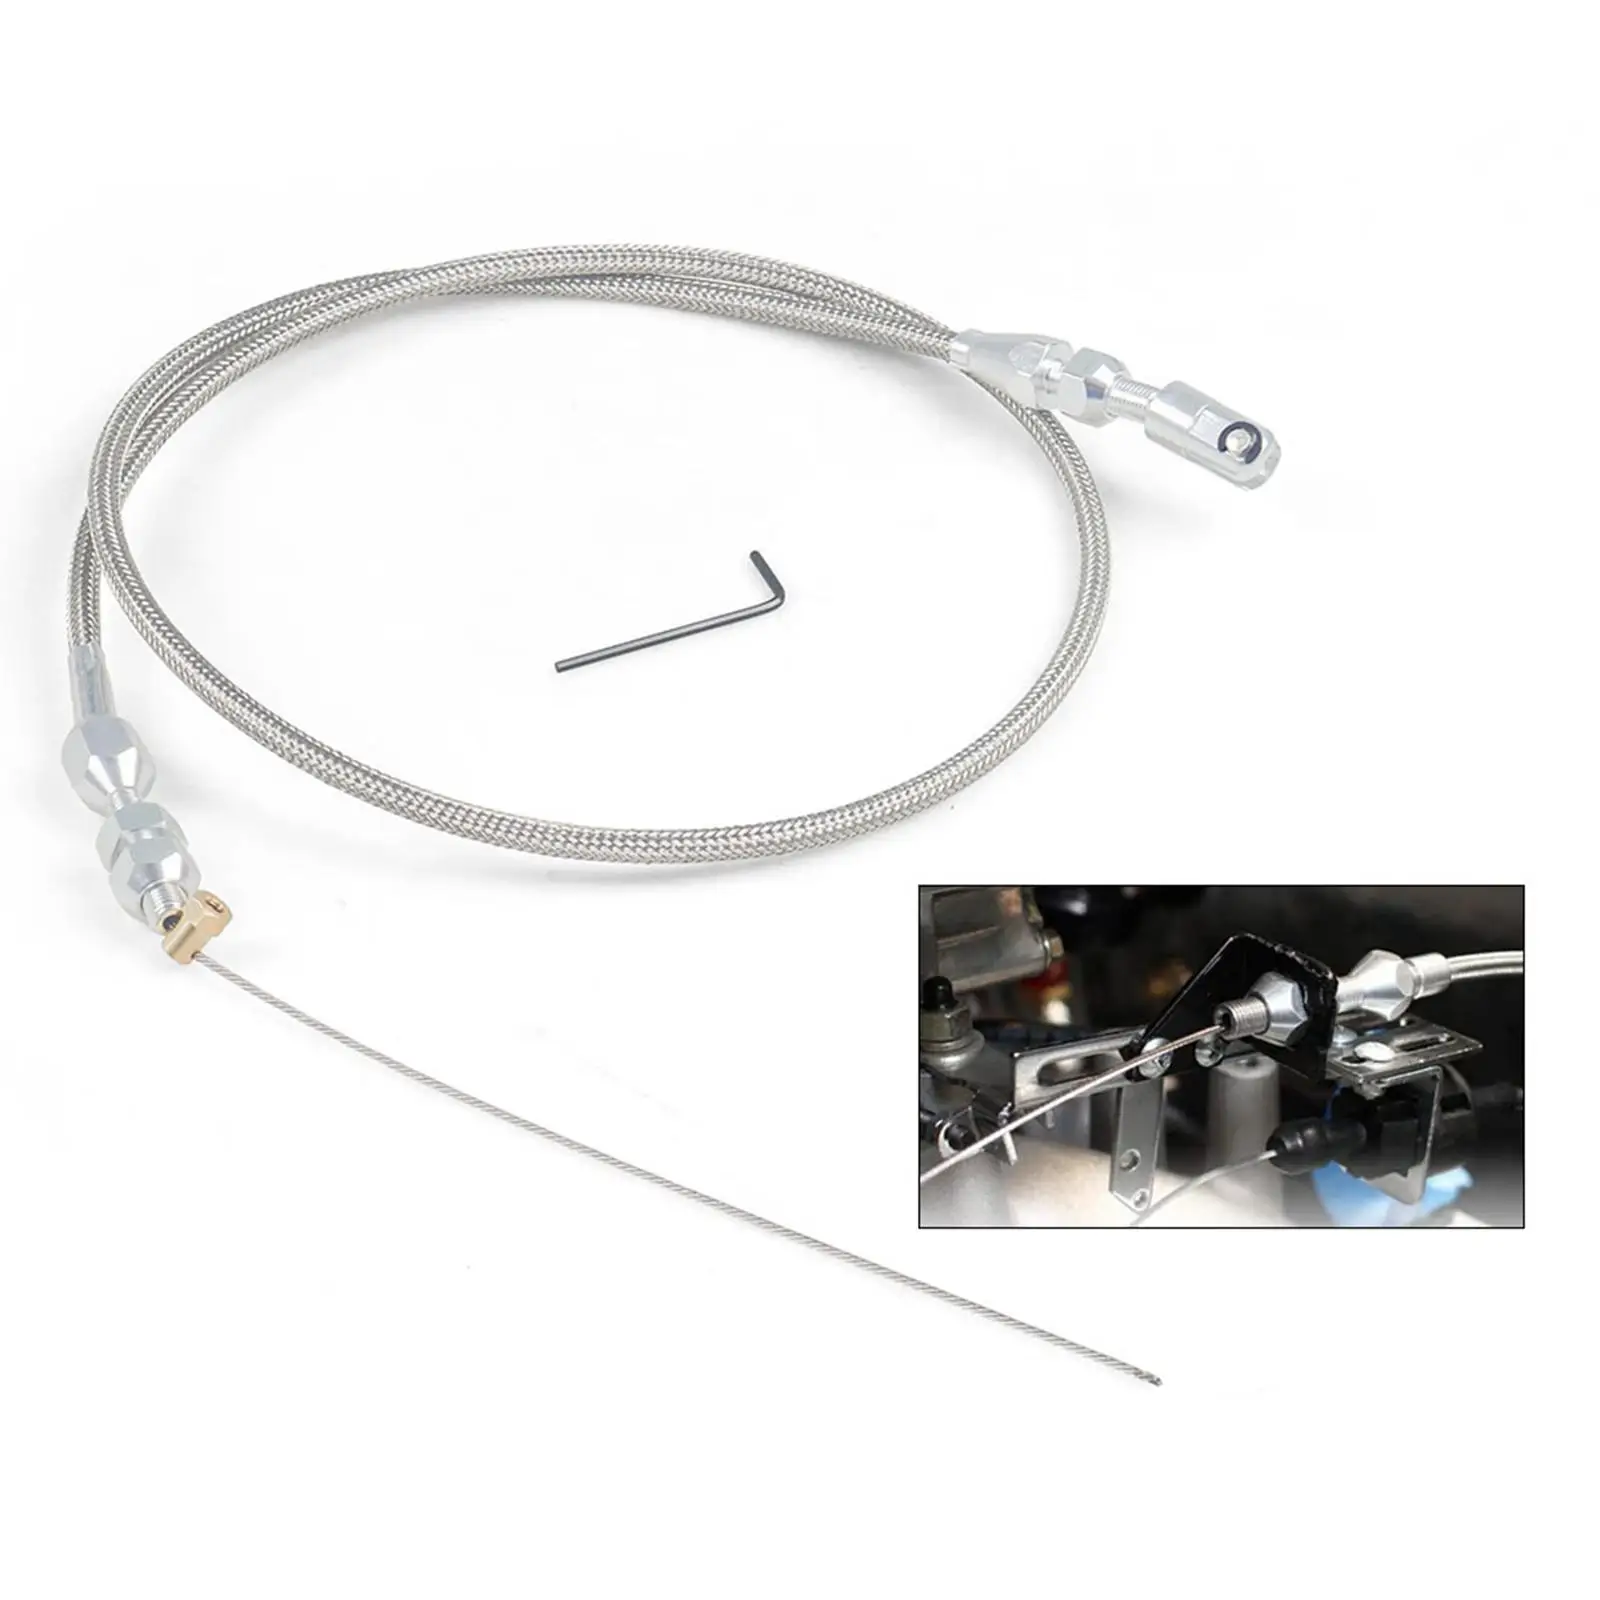 Throttle Cable 36inch Stainless Steel Braided Fit for LS 4.8L 5.3L Easy to Install Replacement Durable Accessories